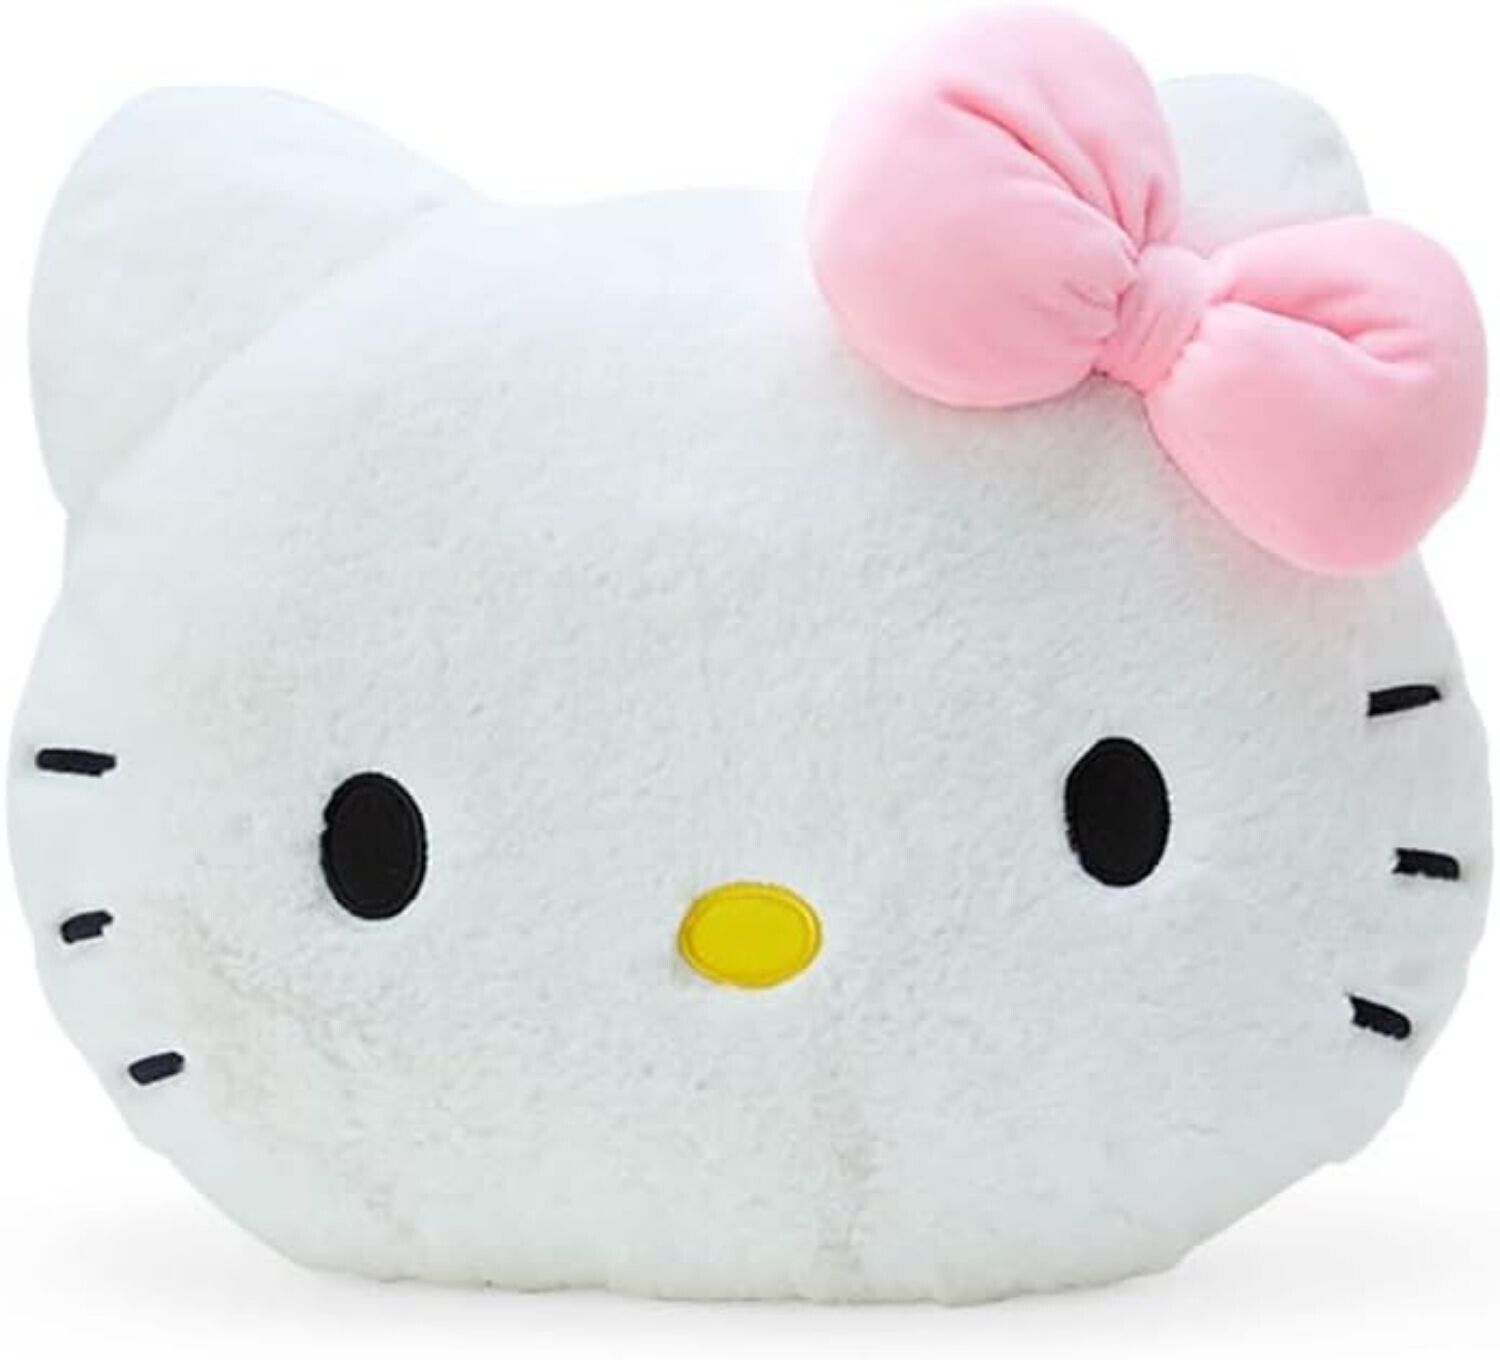 Sanrio Character Hello Kitty Face Shaped Cushion S Stuffed Toy Plush Doll New